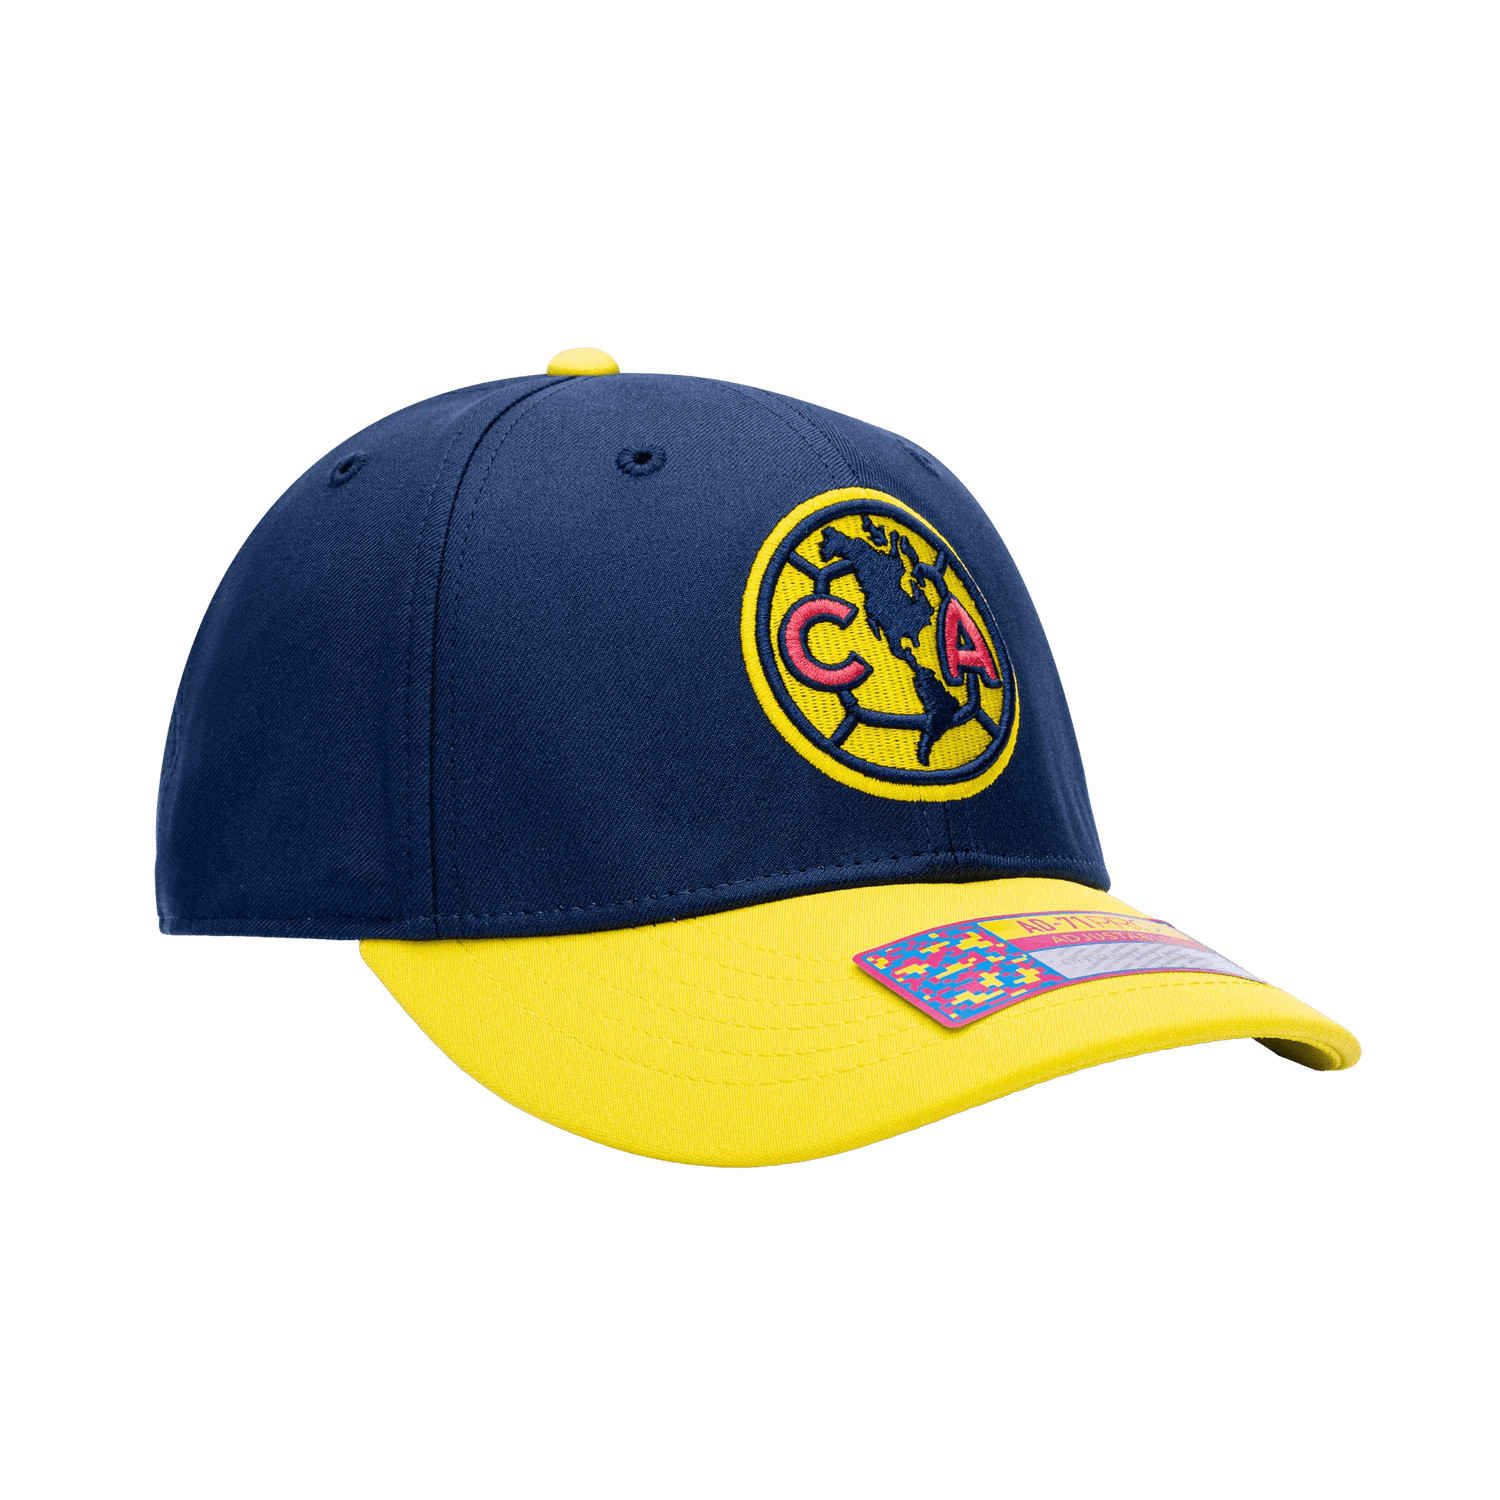 FI Collection Club America Bambo Classic Hat Navy/Yellow (Lateral - Side 2)